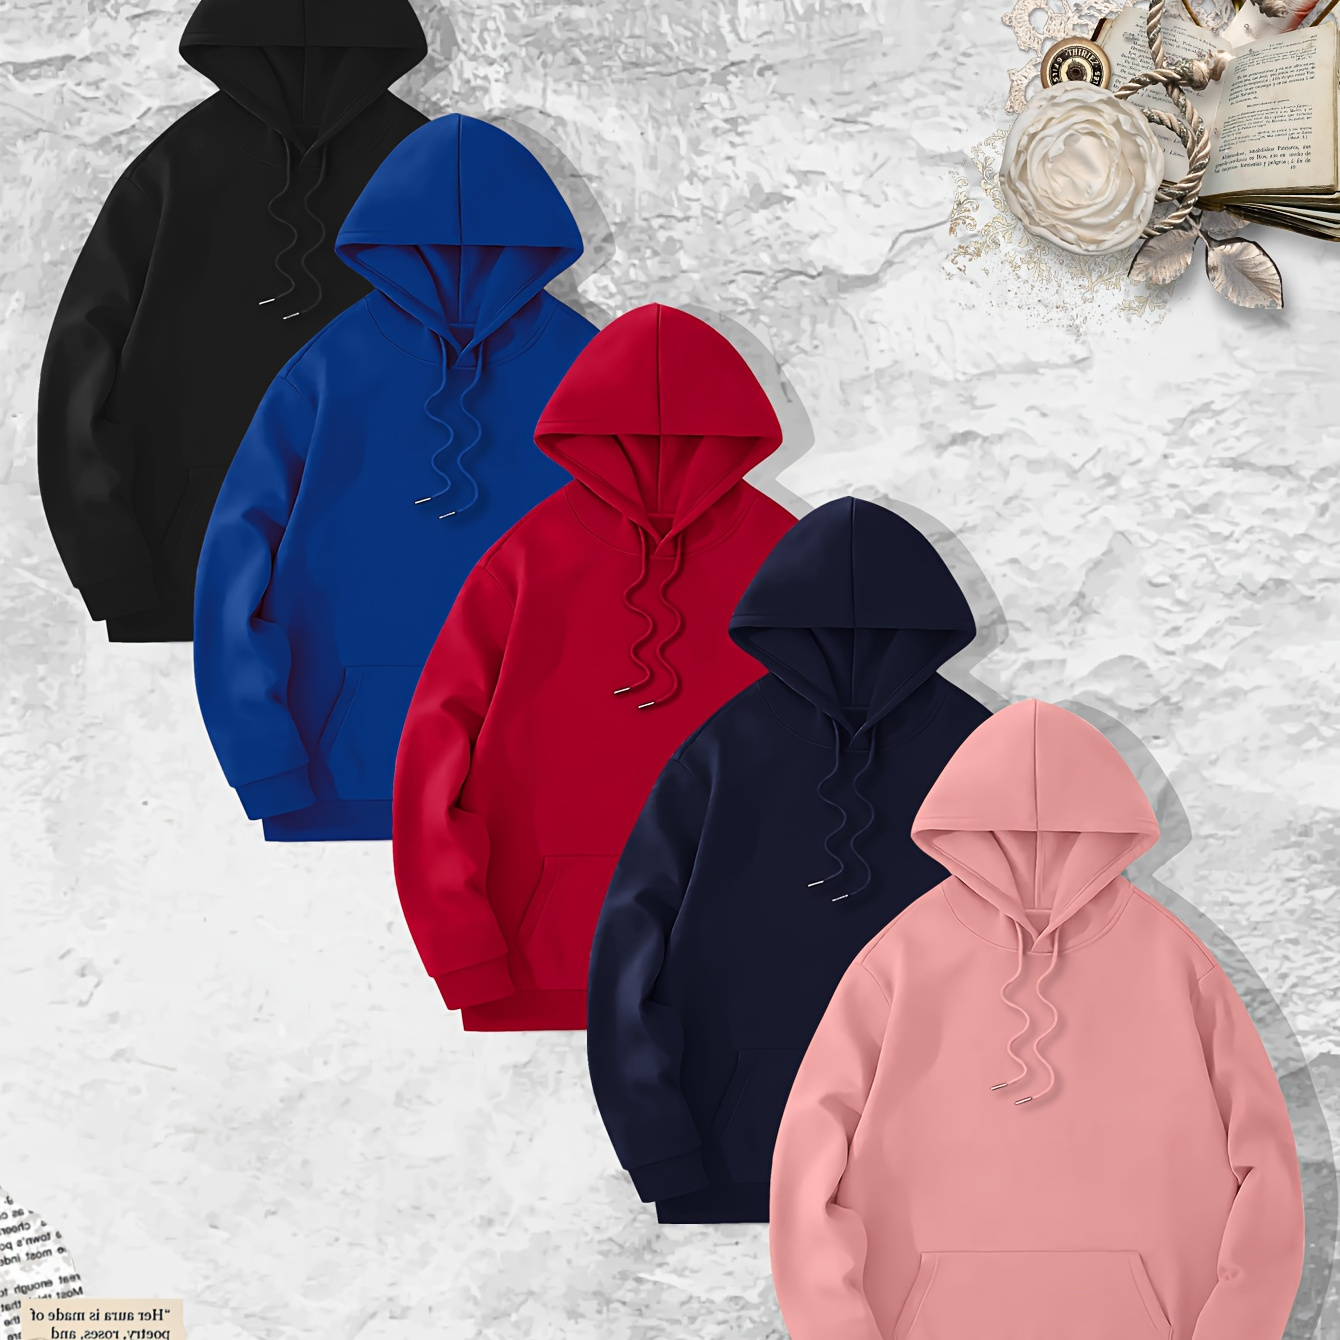 

5pcs Casual Solid Men's Hooded Sweatshirt With Drawstring And Kangaroo Pocket, Men's Pullover Tops For Fall Winter